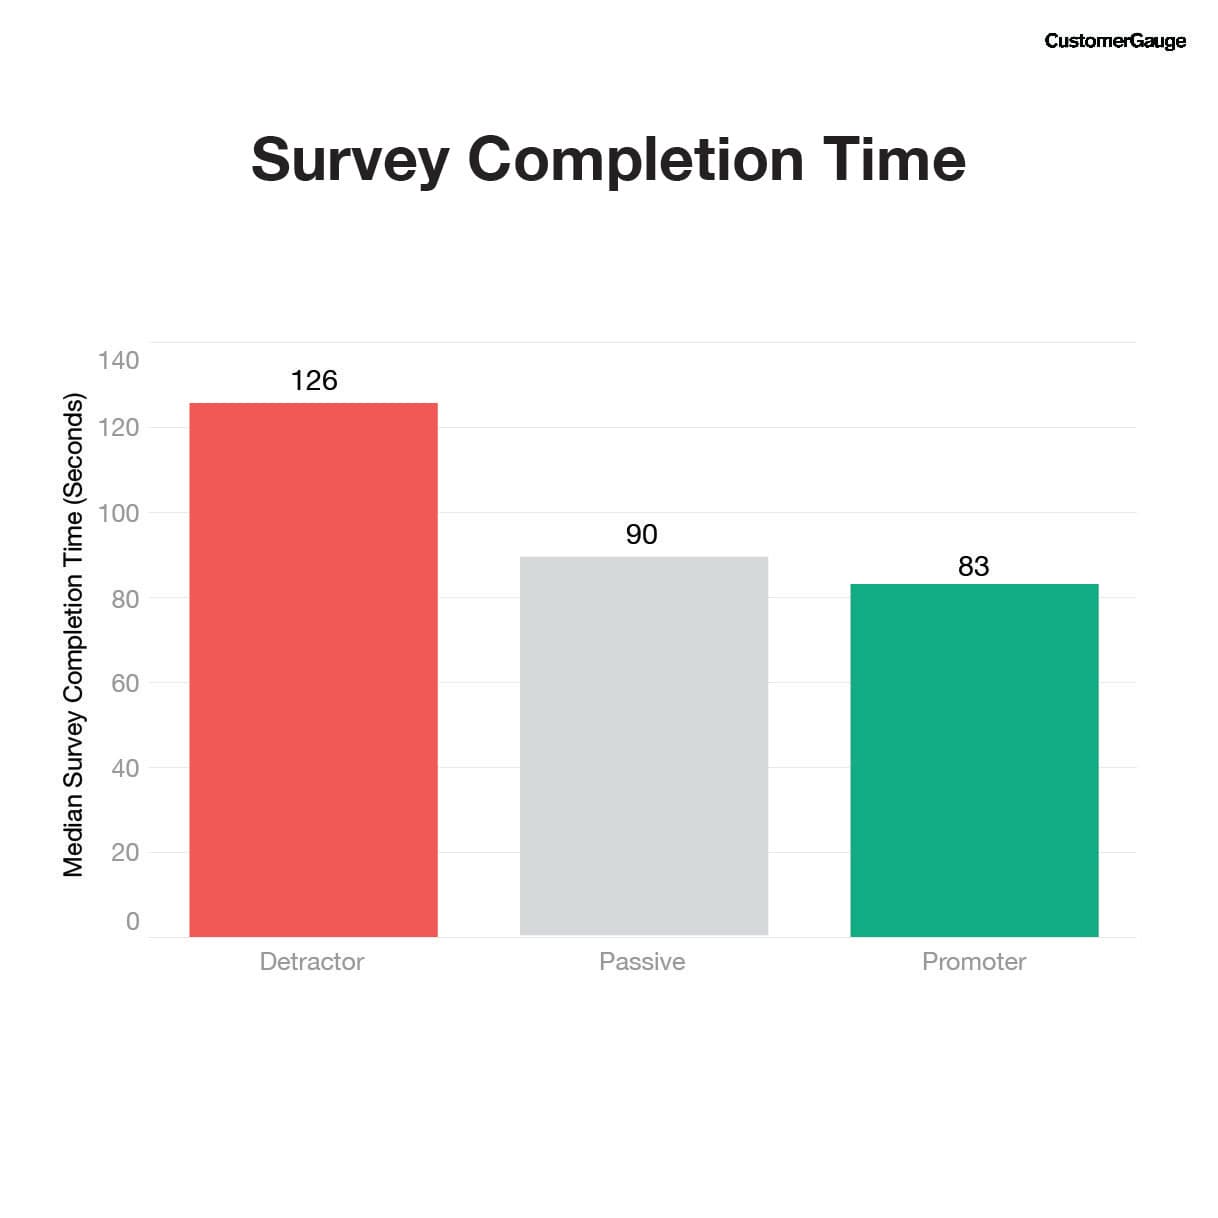 Survey completion time is up for detractors